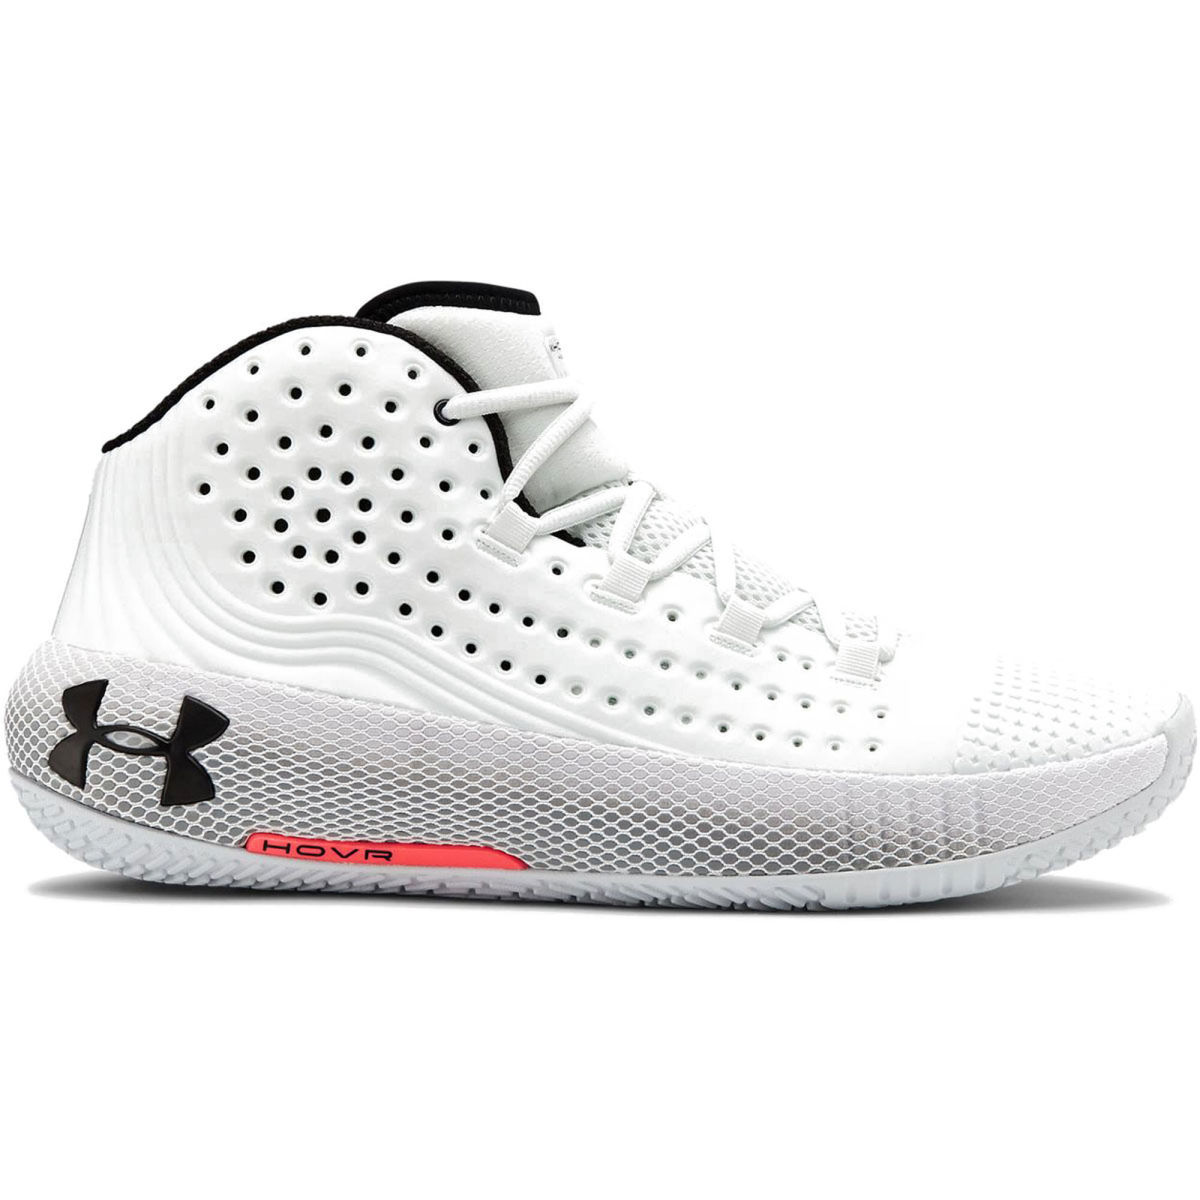 Under Armour Hovr Havoc 2 Men's Basketball Shoes